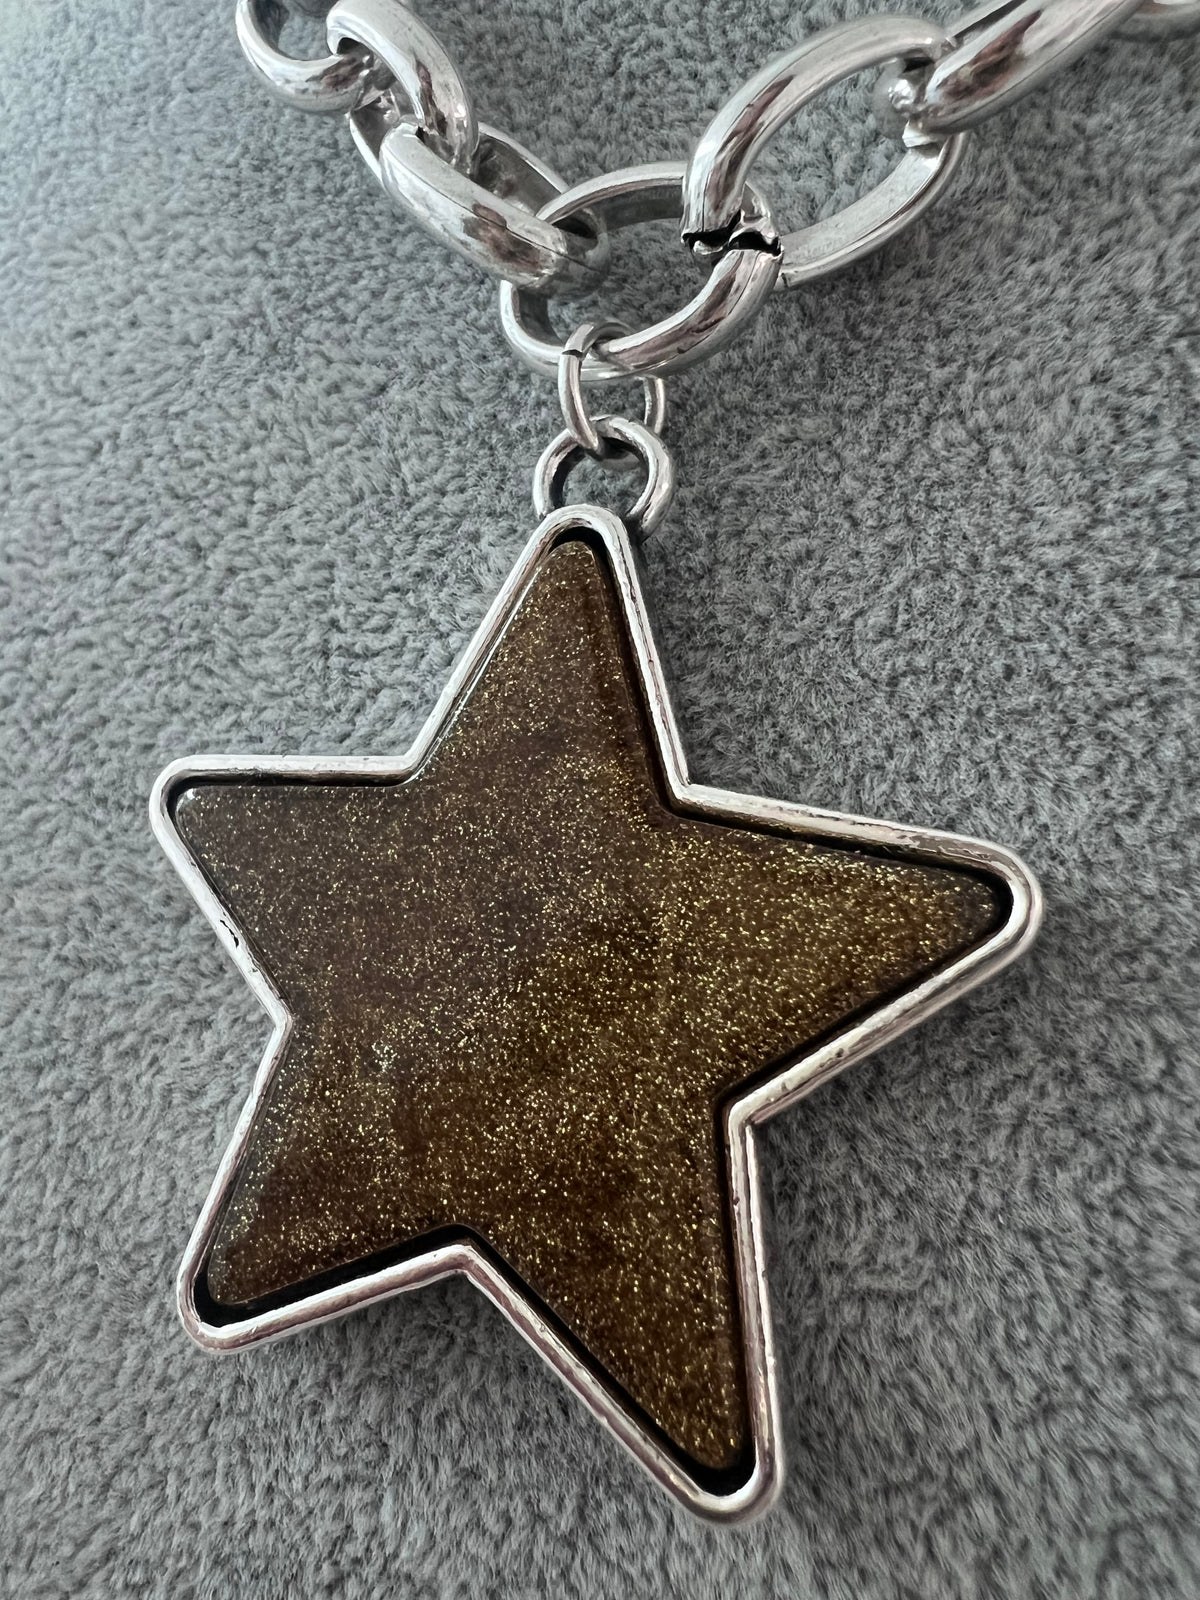 Silver Stars Necklace in